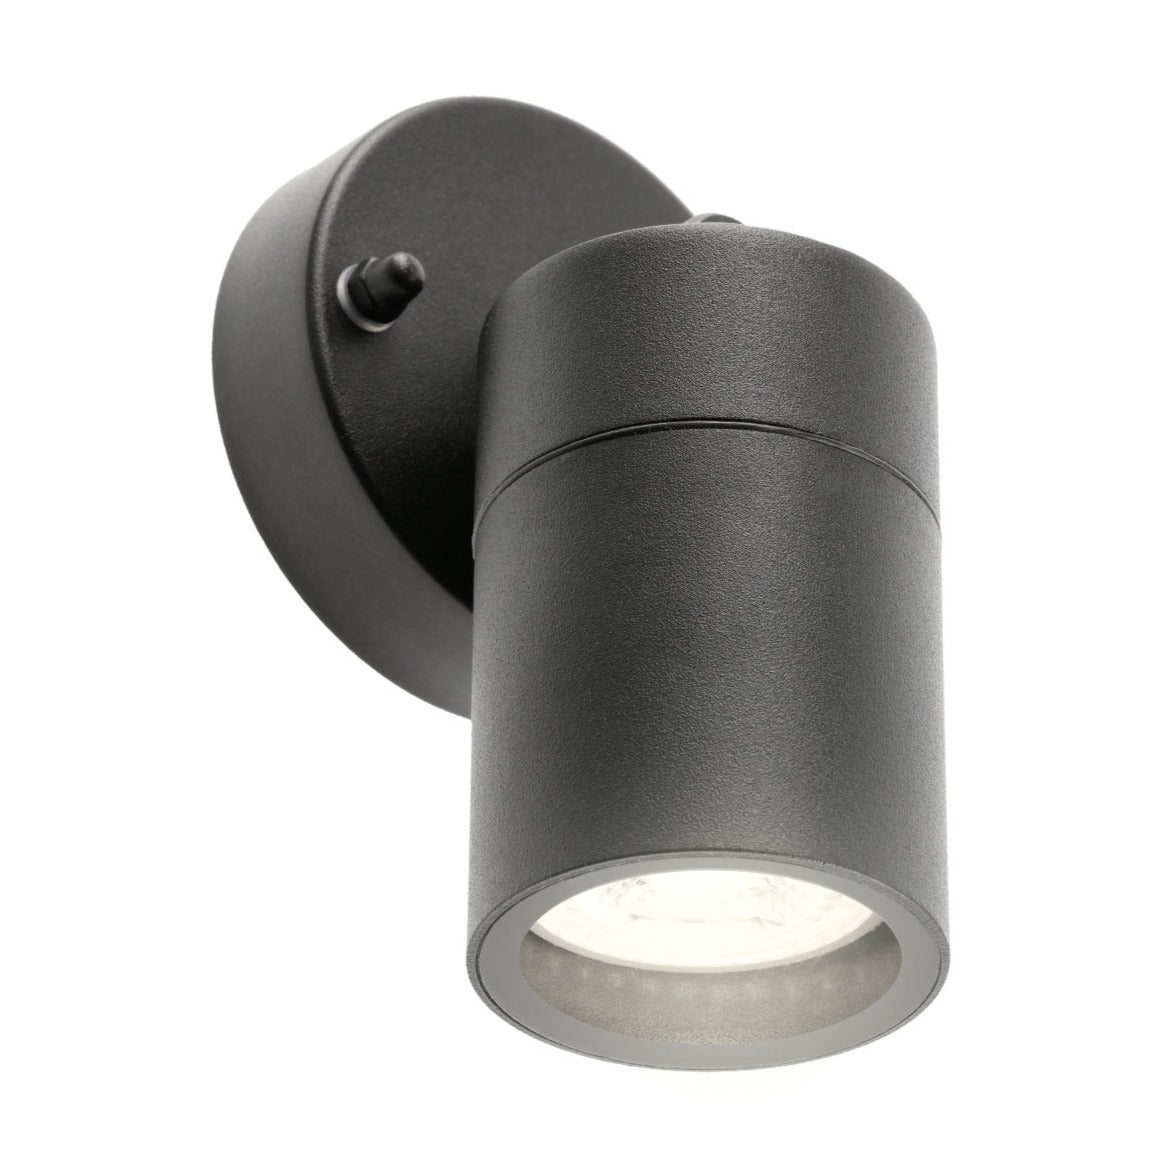 Our Leon outdoor single down light is modern and stylish in its appearance.  It comes in a adjustable cylinder design mounted on a circular back plate and clear glass diffuser. It is designed for durability and longevity with its robust material producing a fully weatherproof and water resistant light fitting